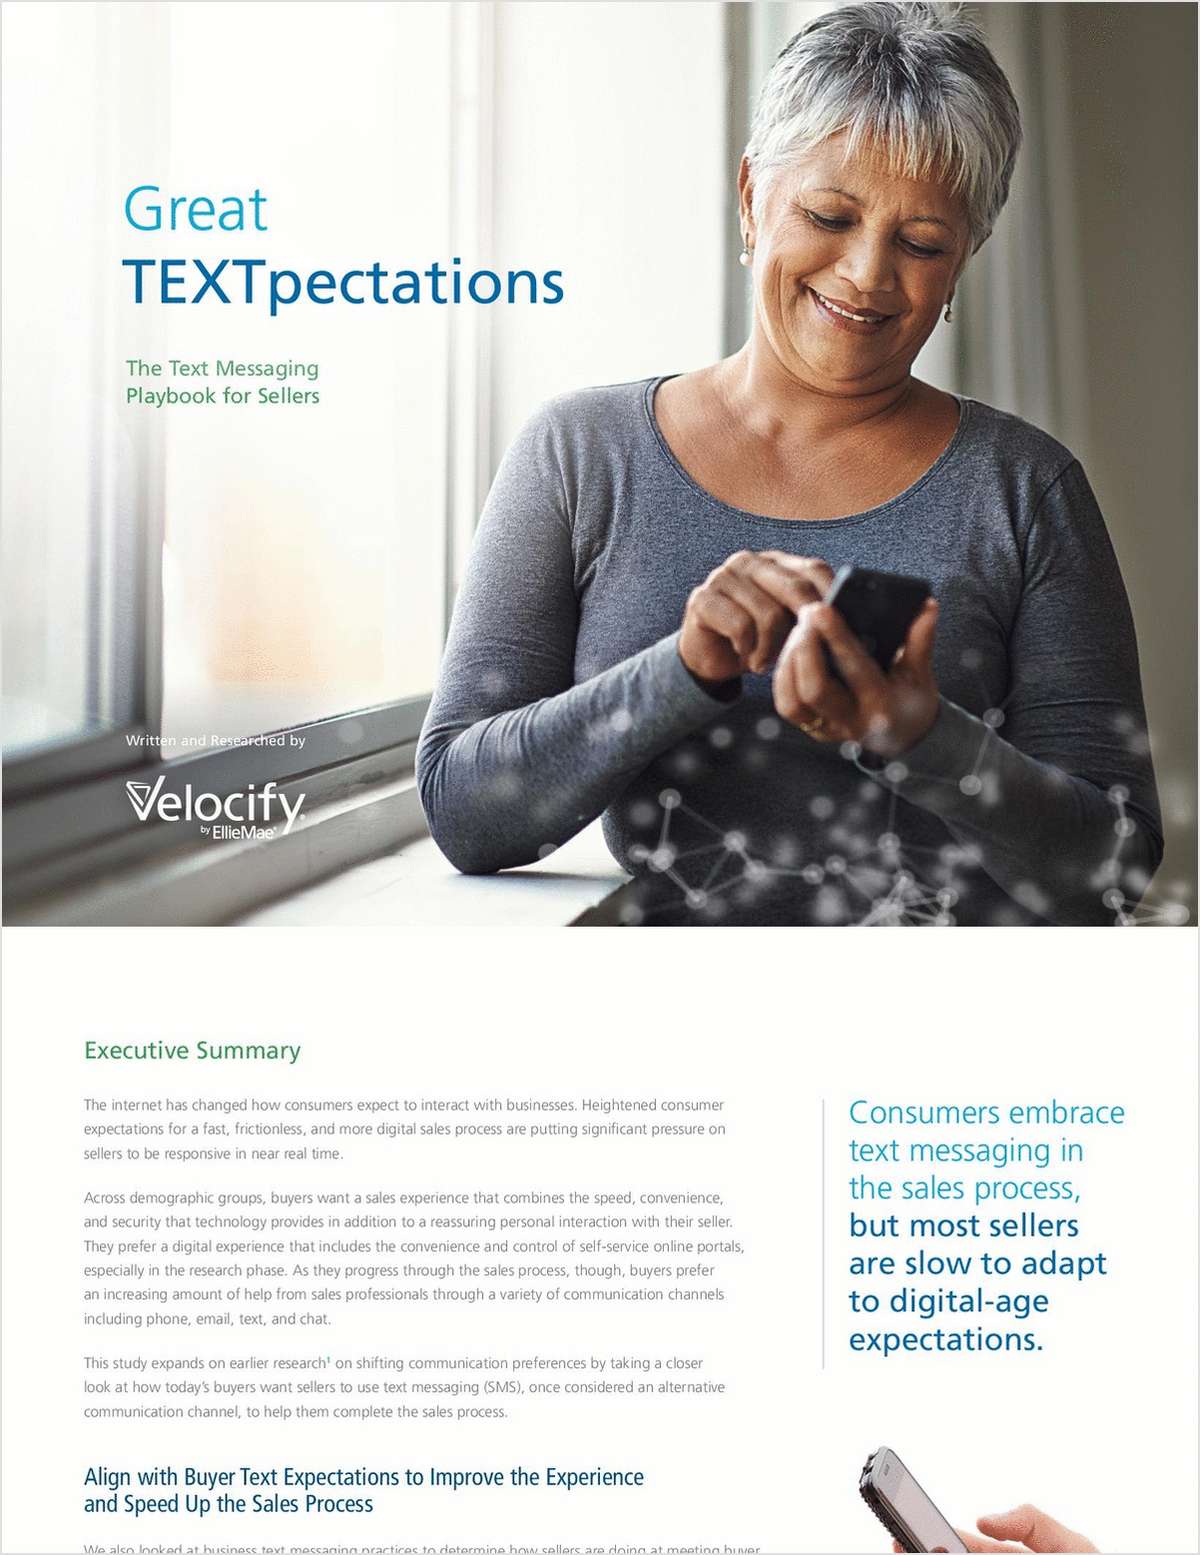 Great TEXTpectations: The Text Messaging Playbook for Sellers